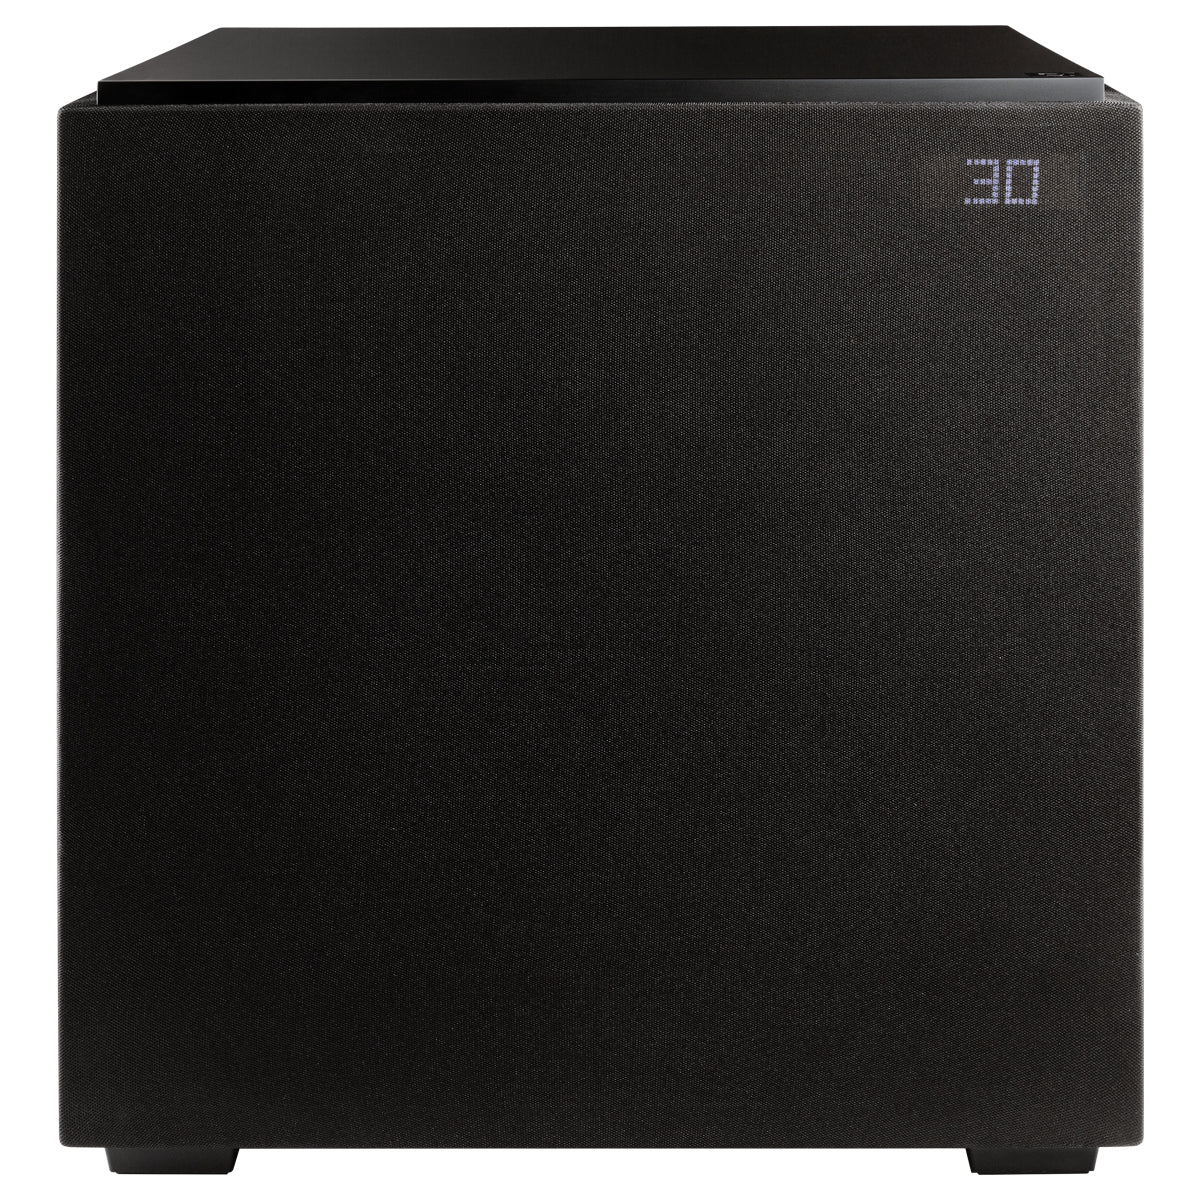 Definitive Technology DN12 Powered 12" active subwoofer - The Audio Experts